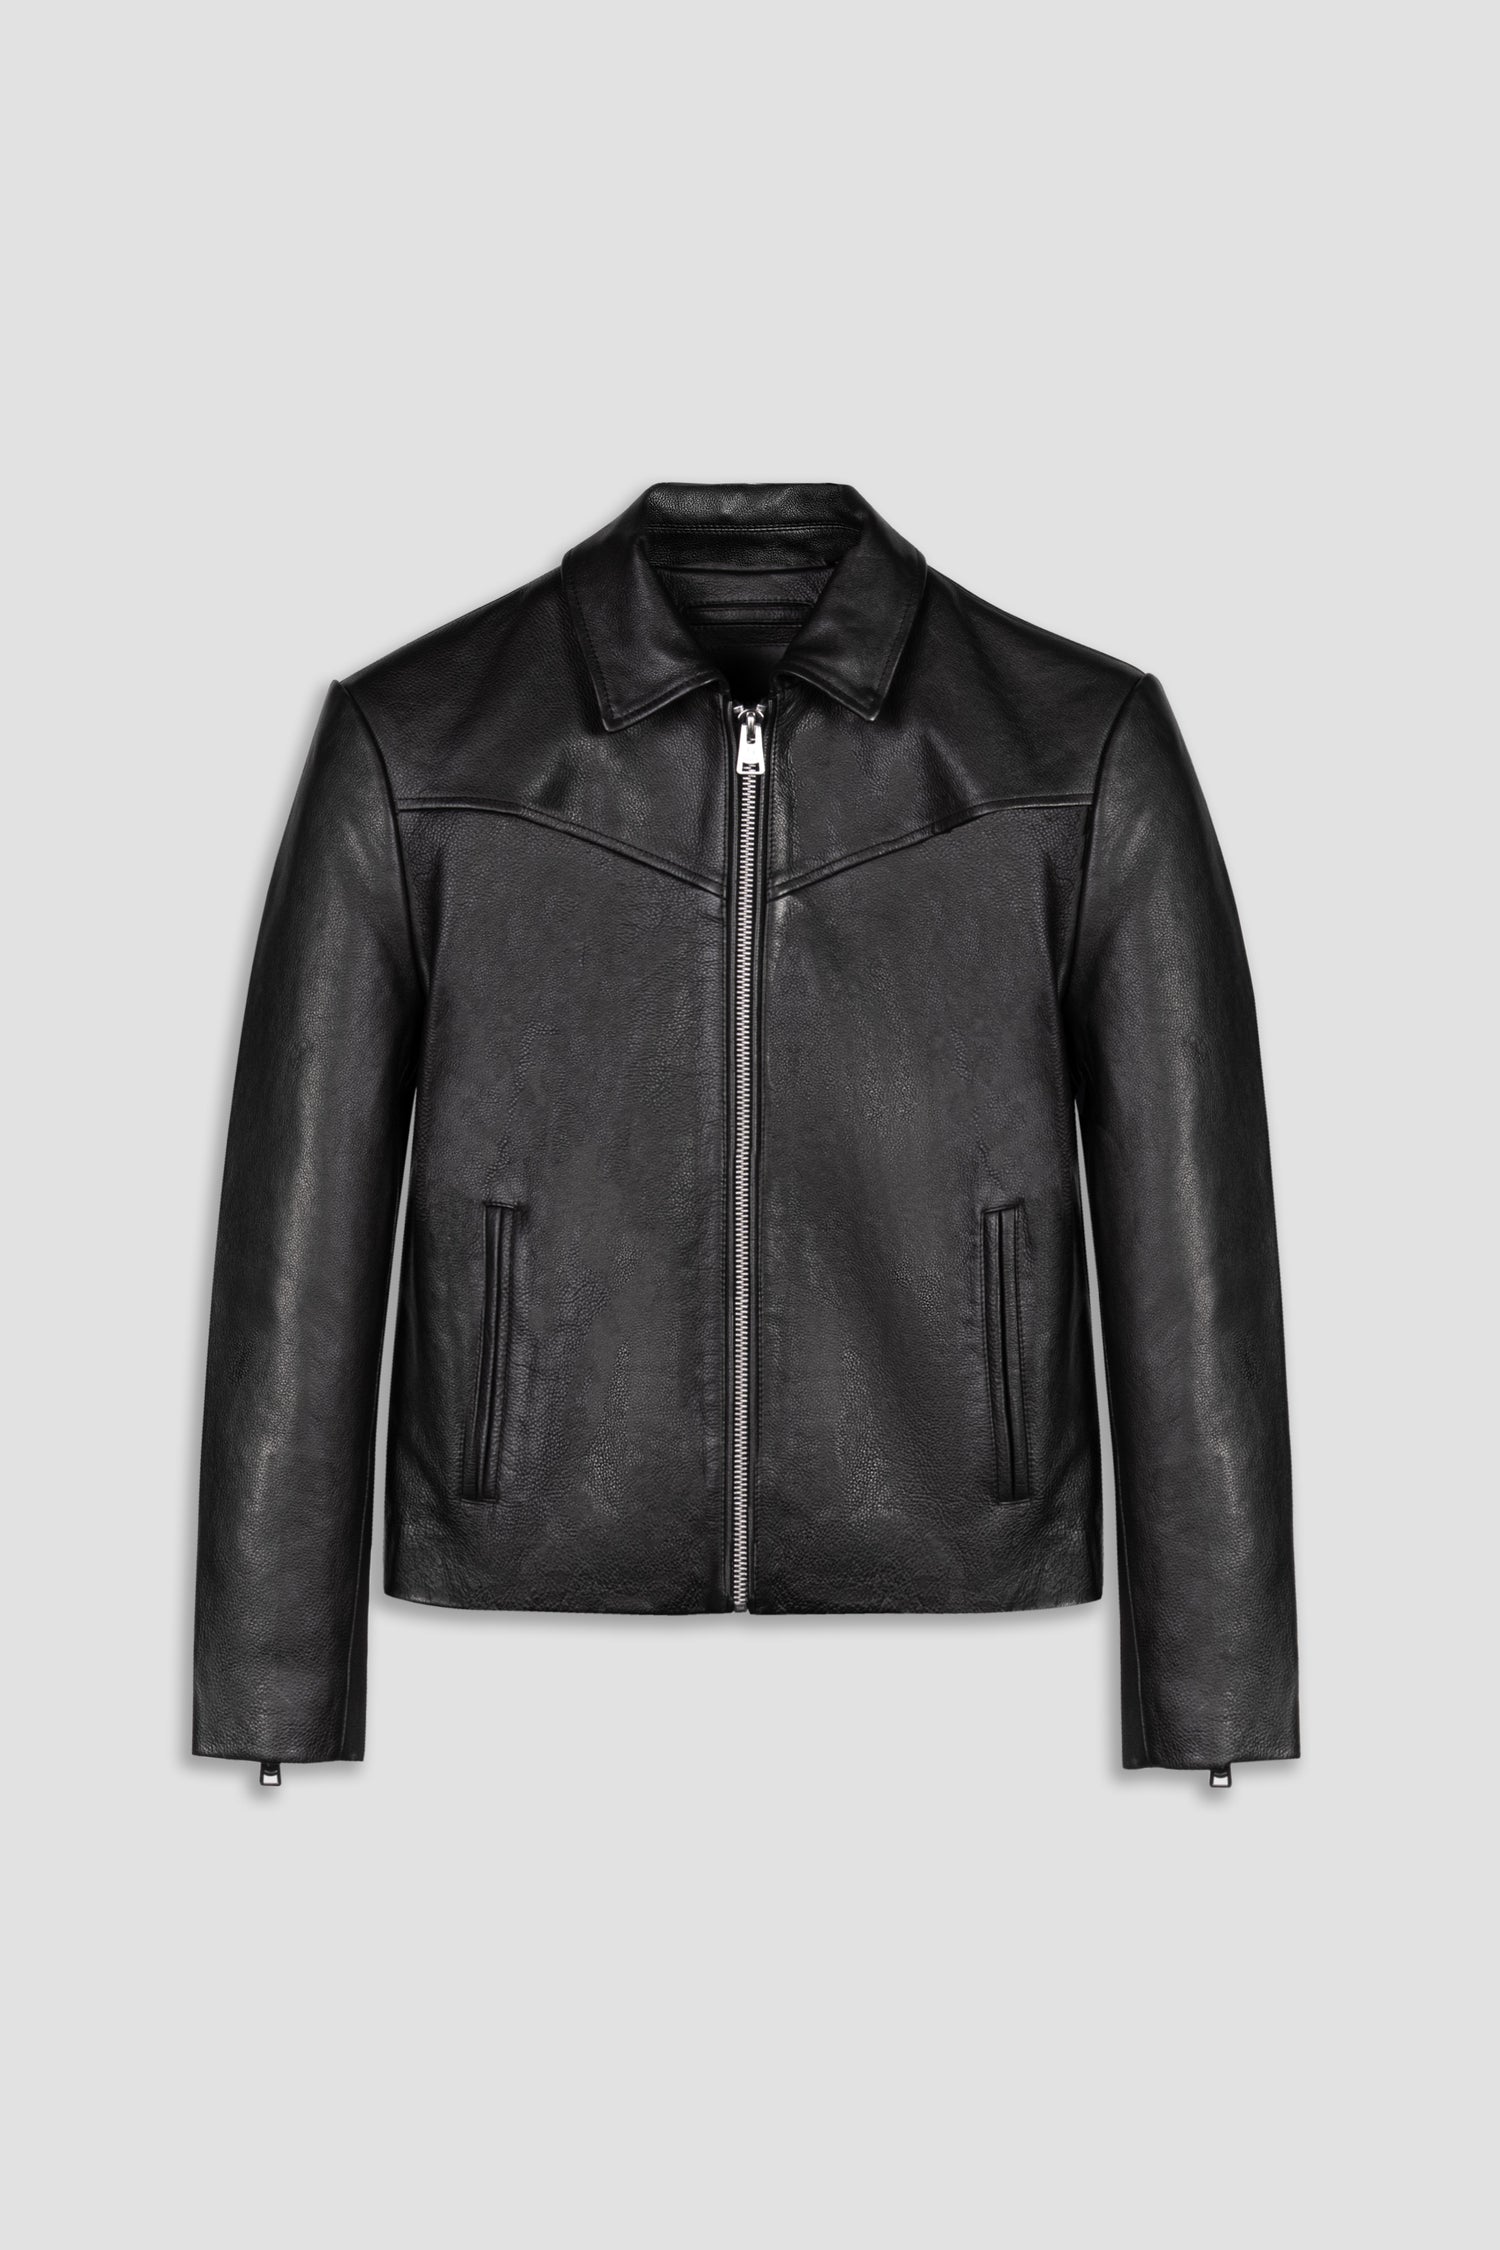 Mens Leather Jackets - By Price: Lowest to Highest